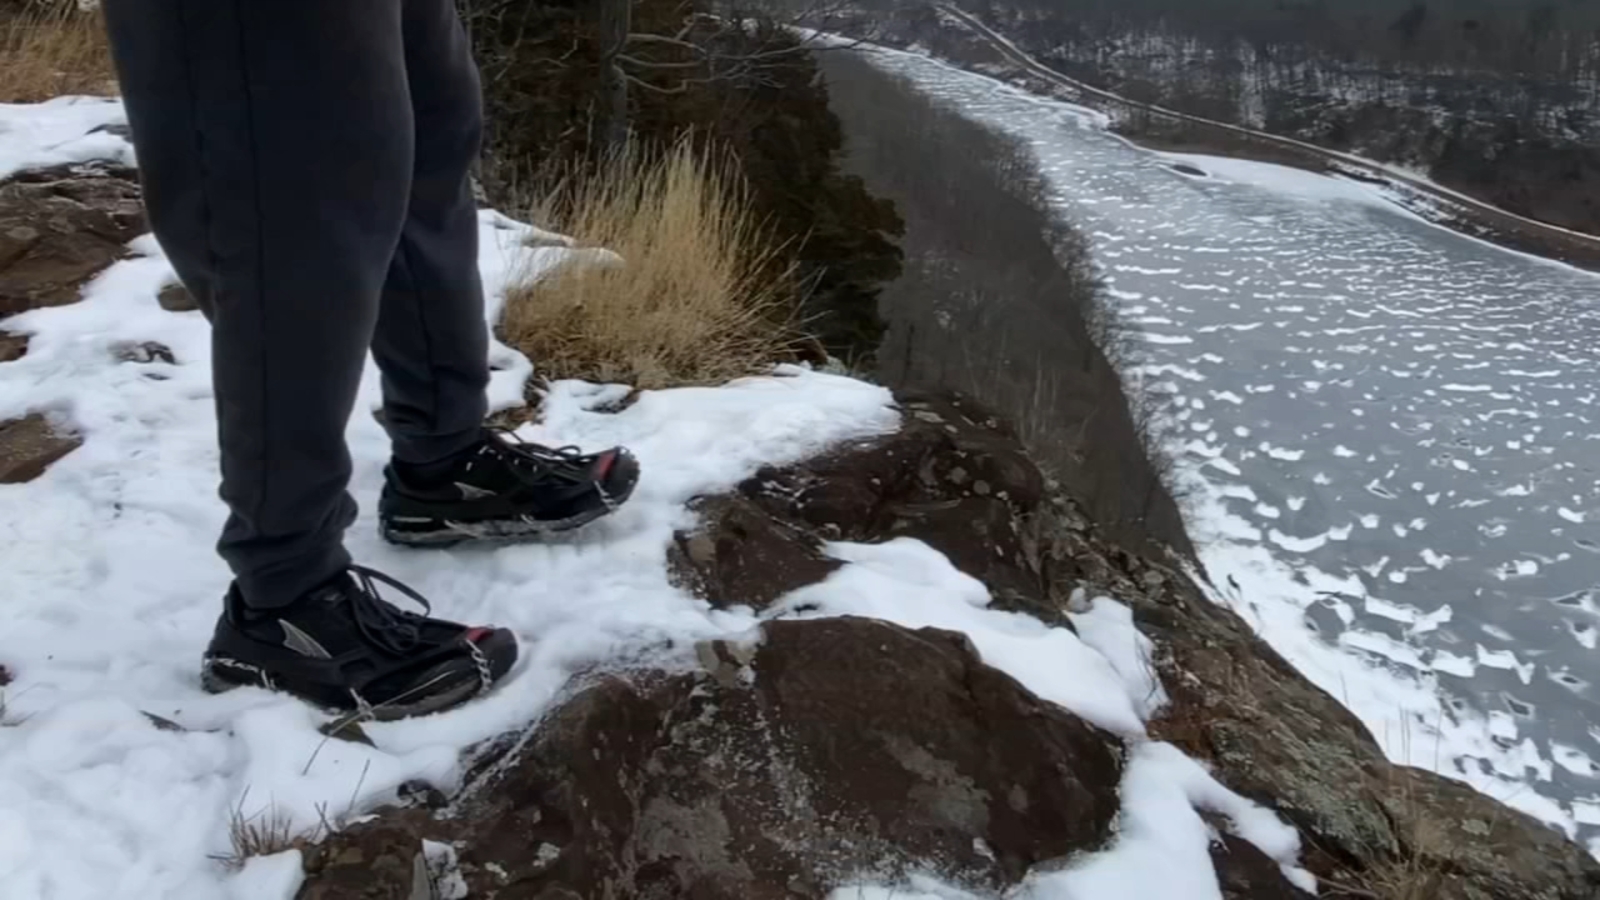 Consumer Reports: How to avoid injuries in slick and slippery conditions this winter [Video]